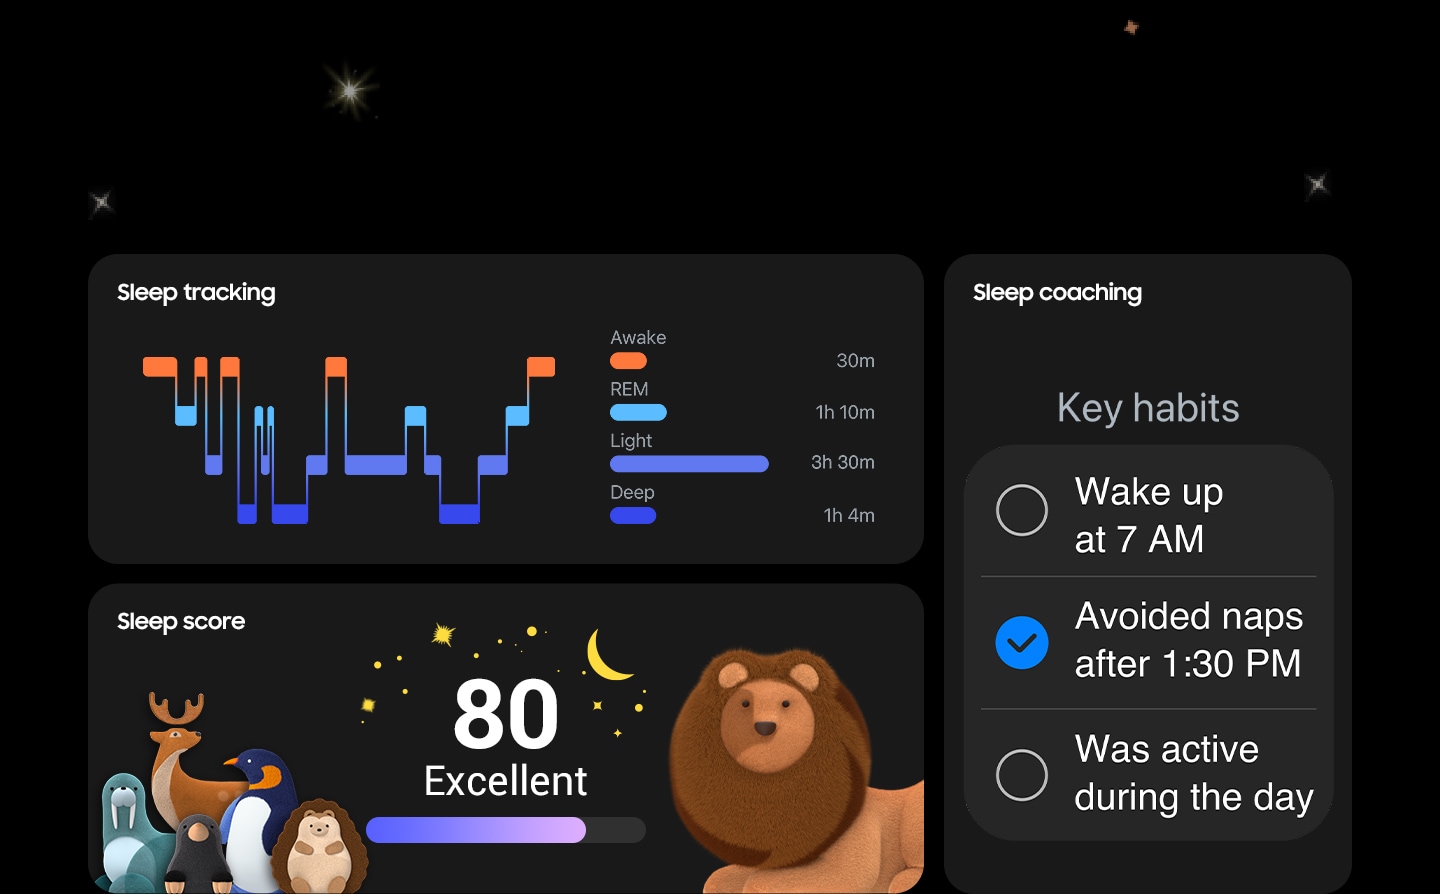 Three tiles, each showing a different Sleep Monitoring feature. One for Sleep tracking shows the time spent in each sleep stage and the graph. Another one for Sleep score shows a lion sleep symbol with the score. The other one for Sleep coaching shows a list of selectable key habits with 'Avoided naps after 1:30 PM' selected.